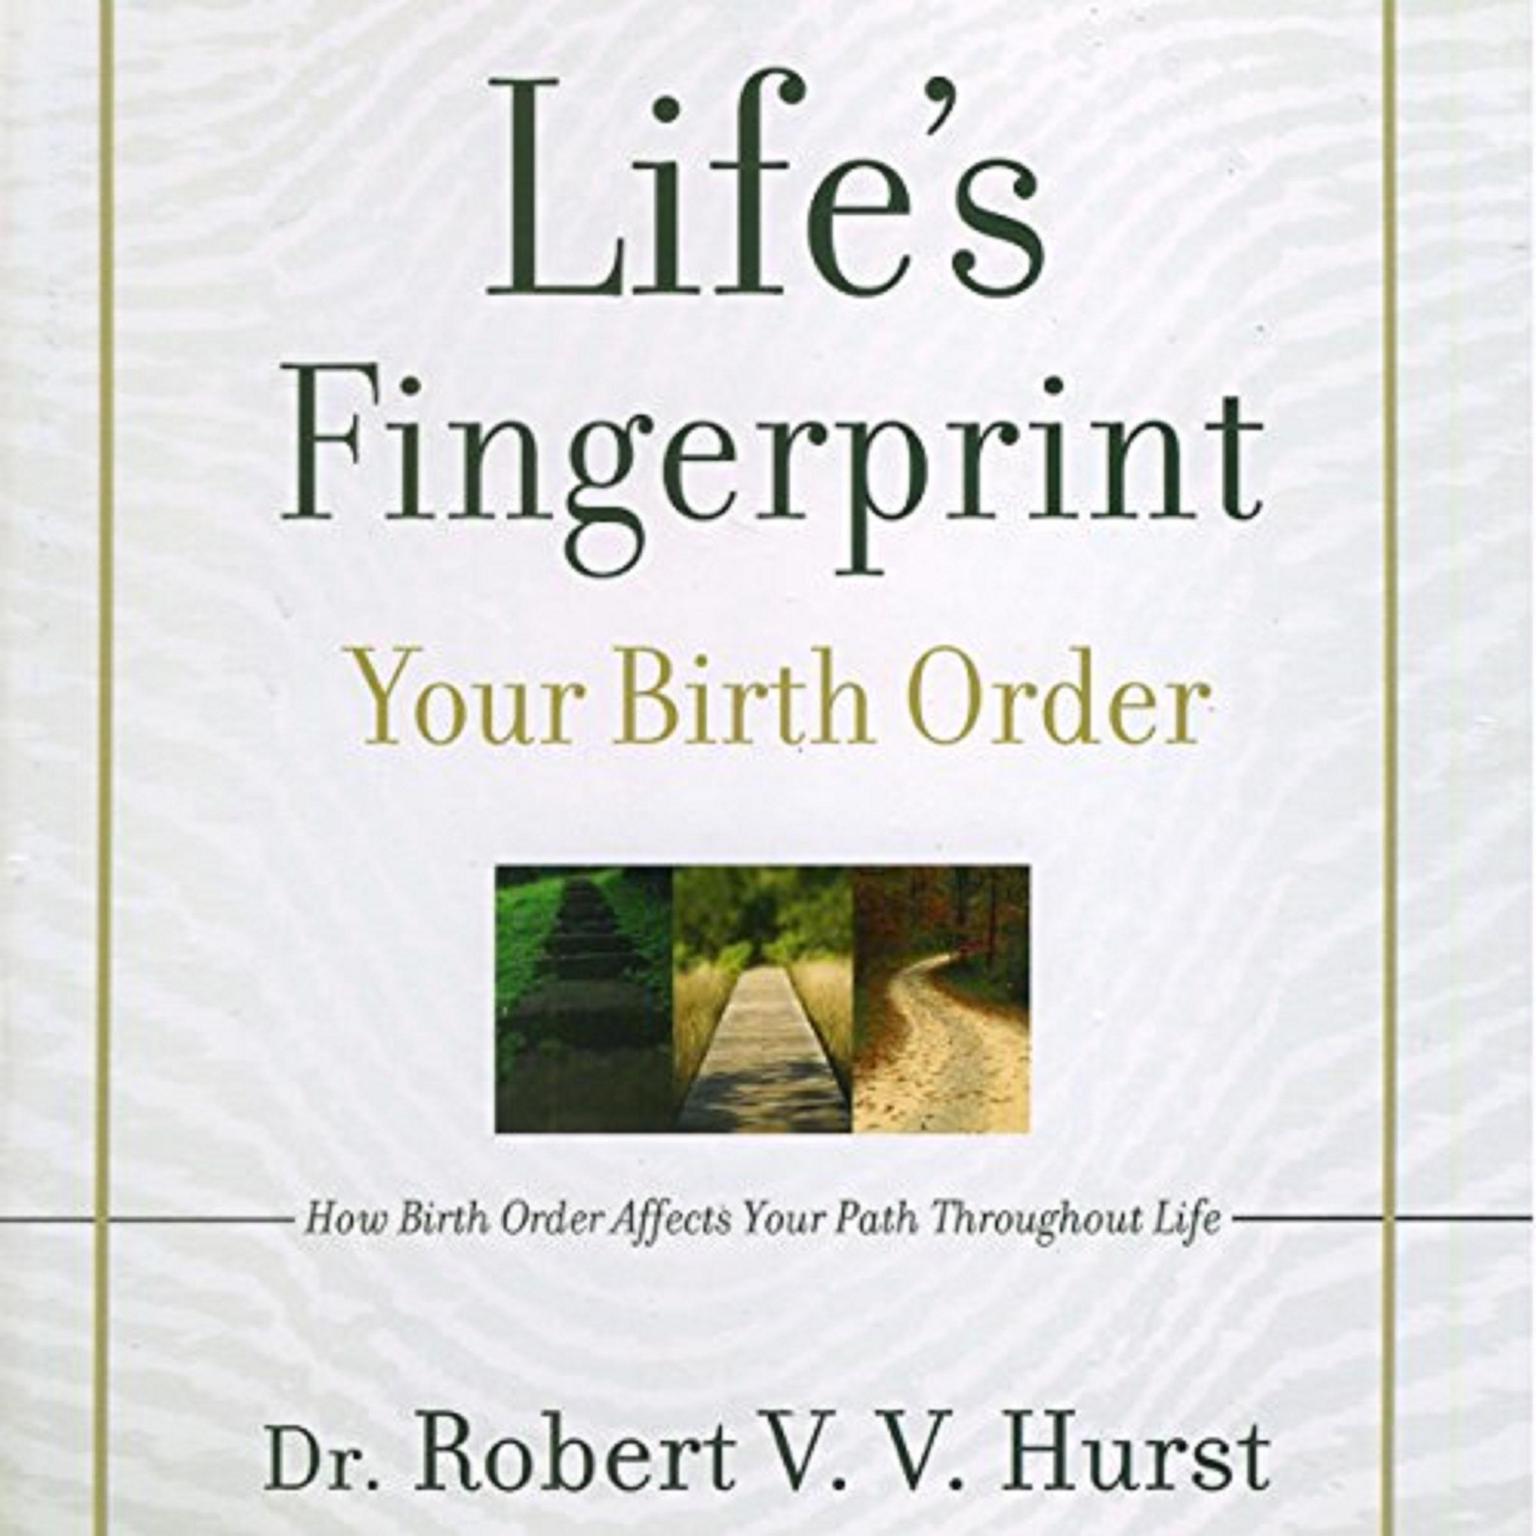 Lifes Fingerprint: How Birth Order Affects Your Path Throughout Life Audiobook, by Robert V. V. Hurst